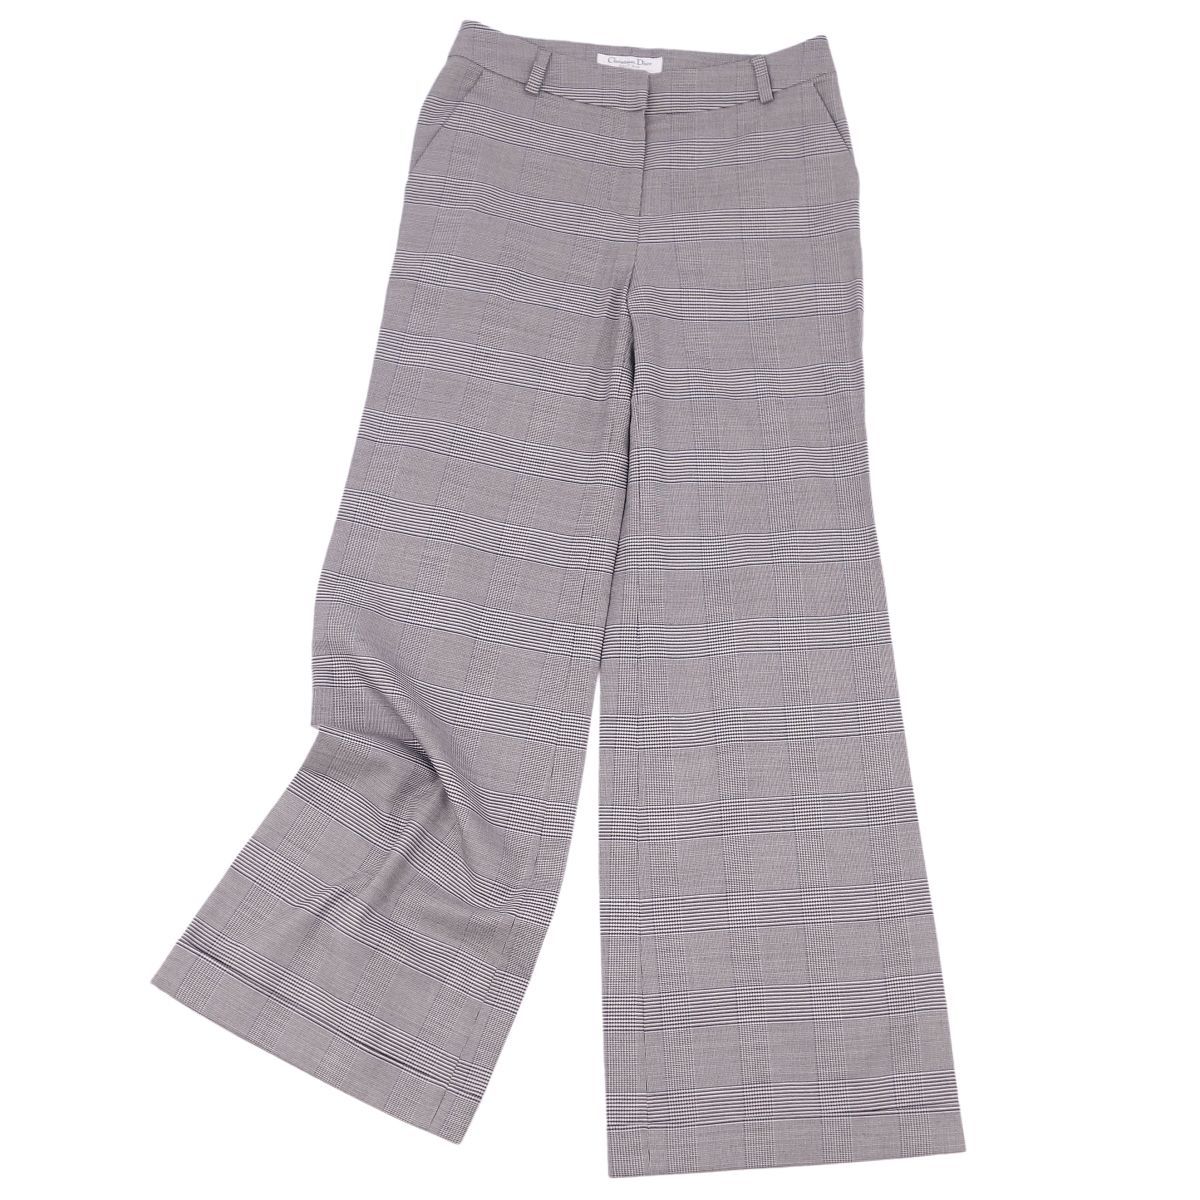  beautiful goods Christian Dior Christian Dior pants flair wide pants check lady's bottoms F36(S) gray ch10dn-rm05c12262